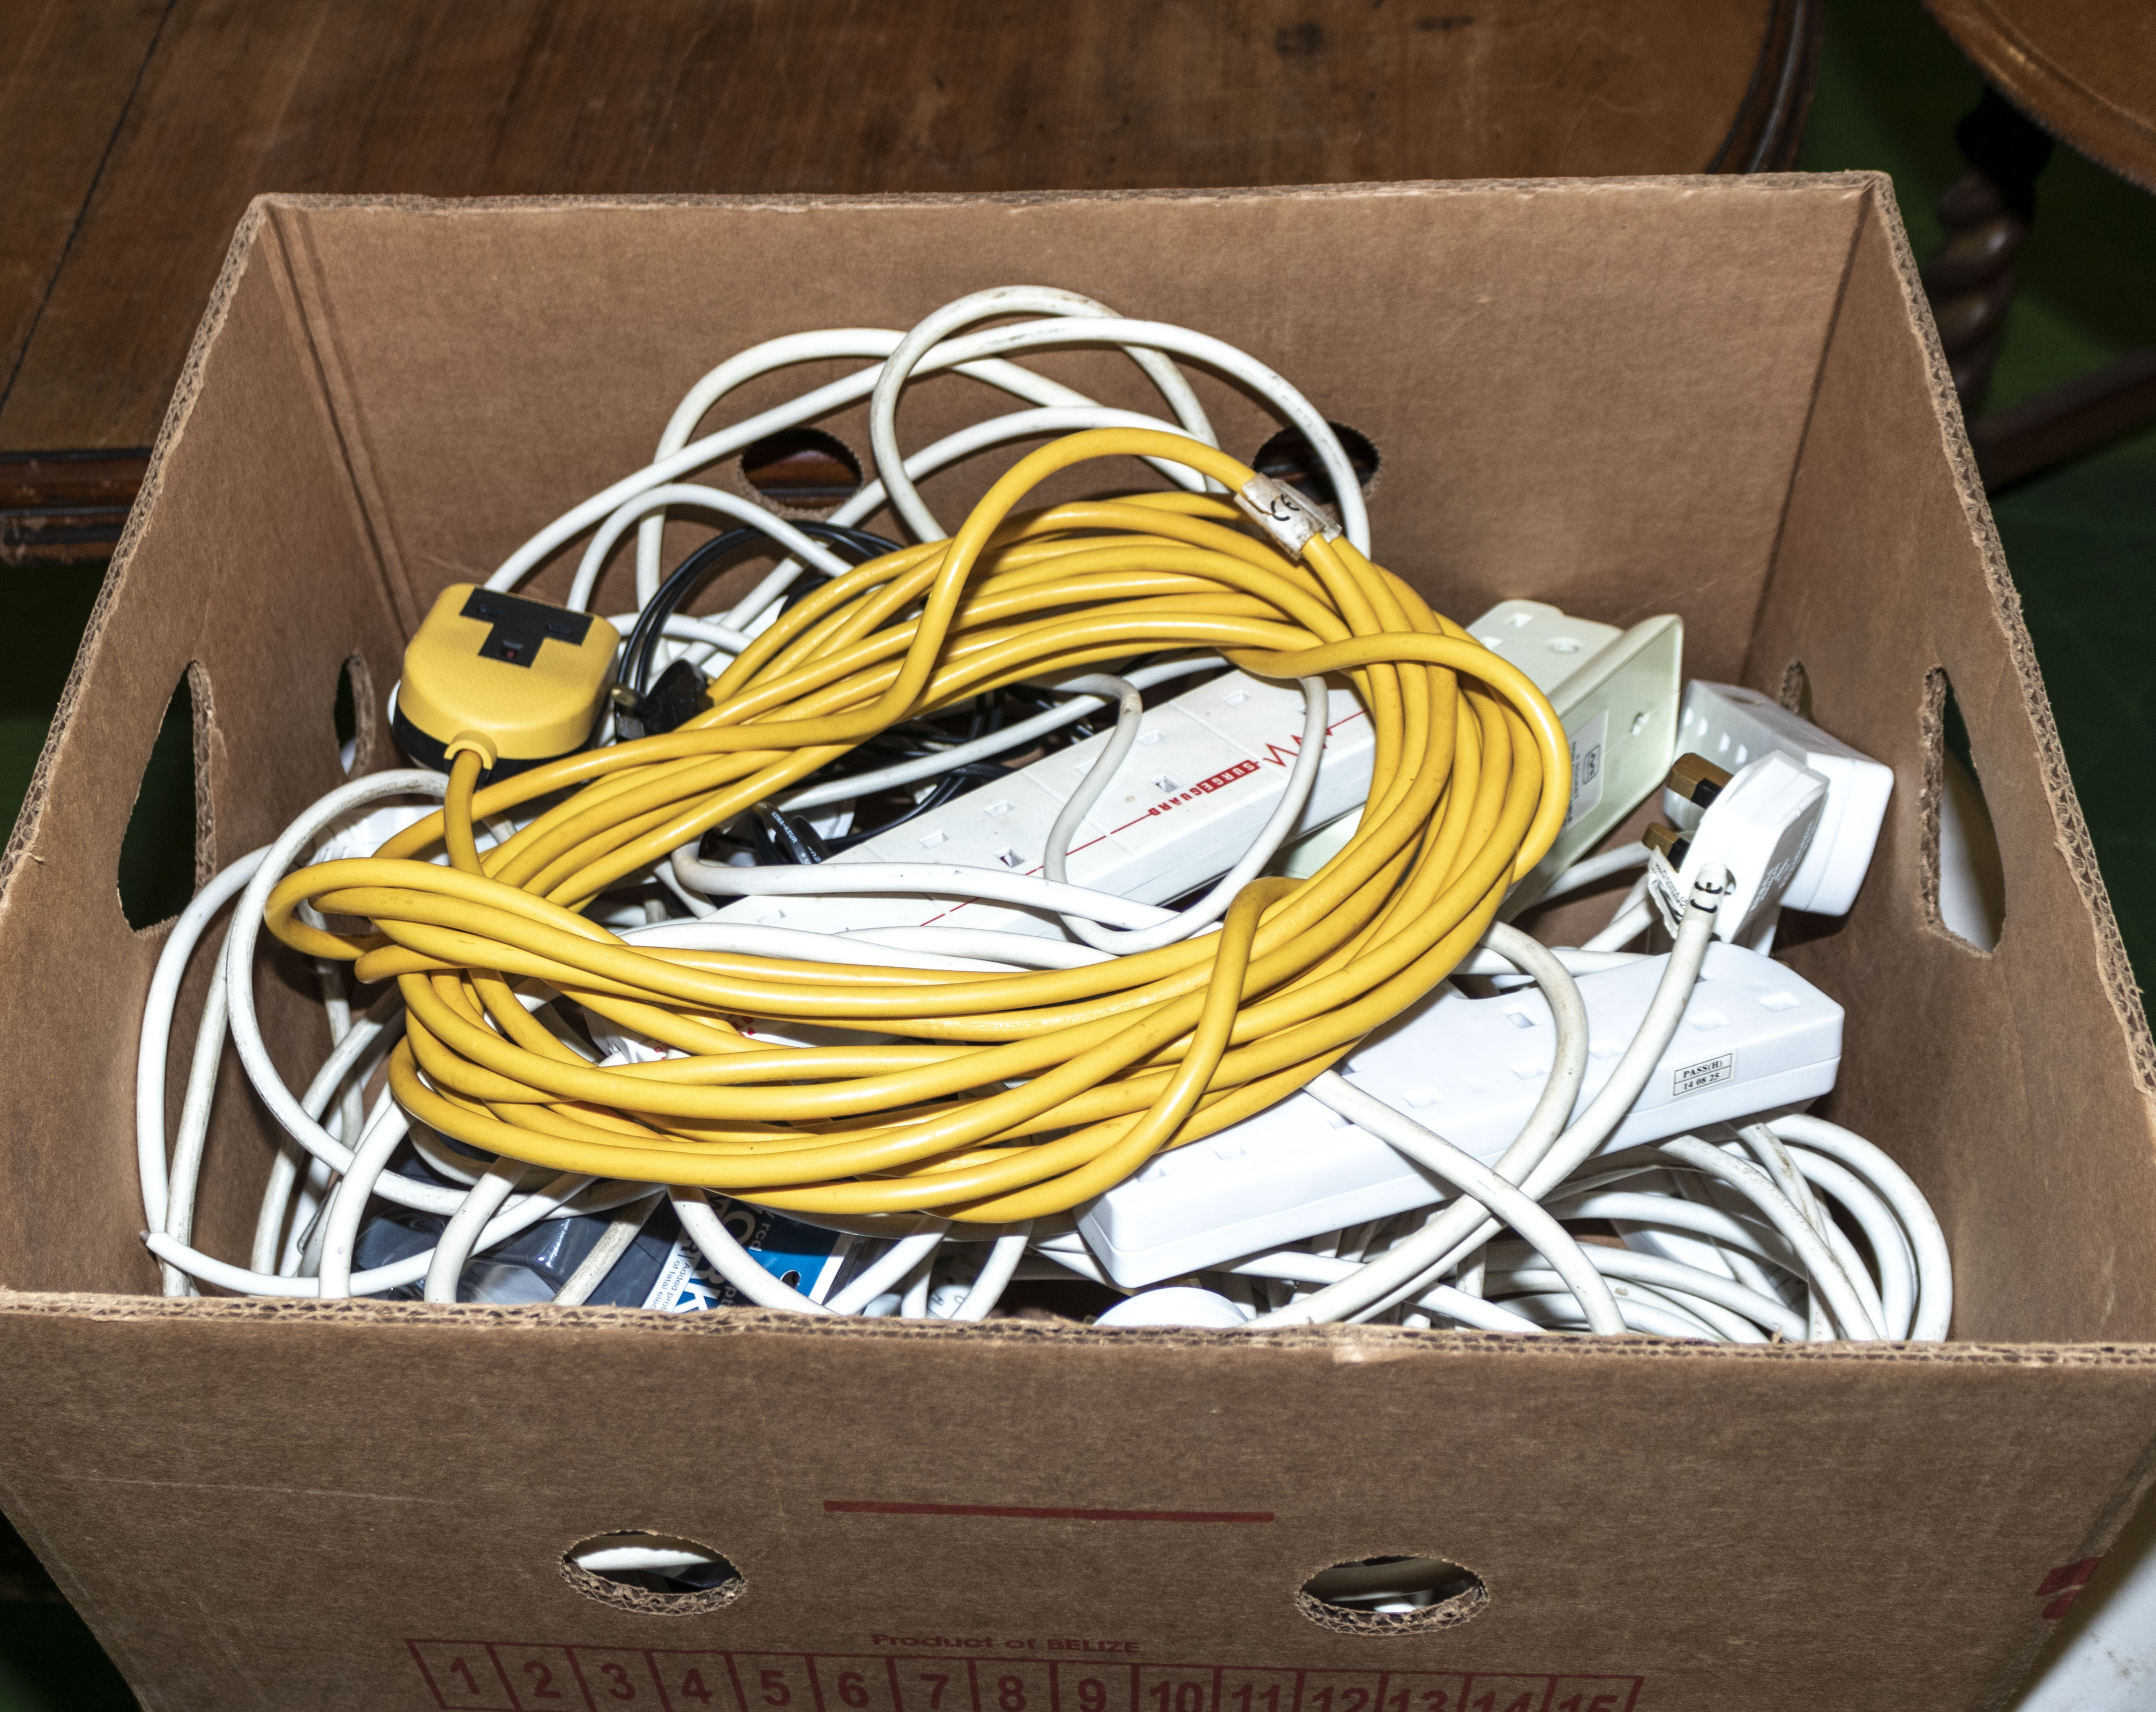 A box containing extension leads and adapters